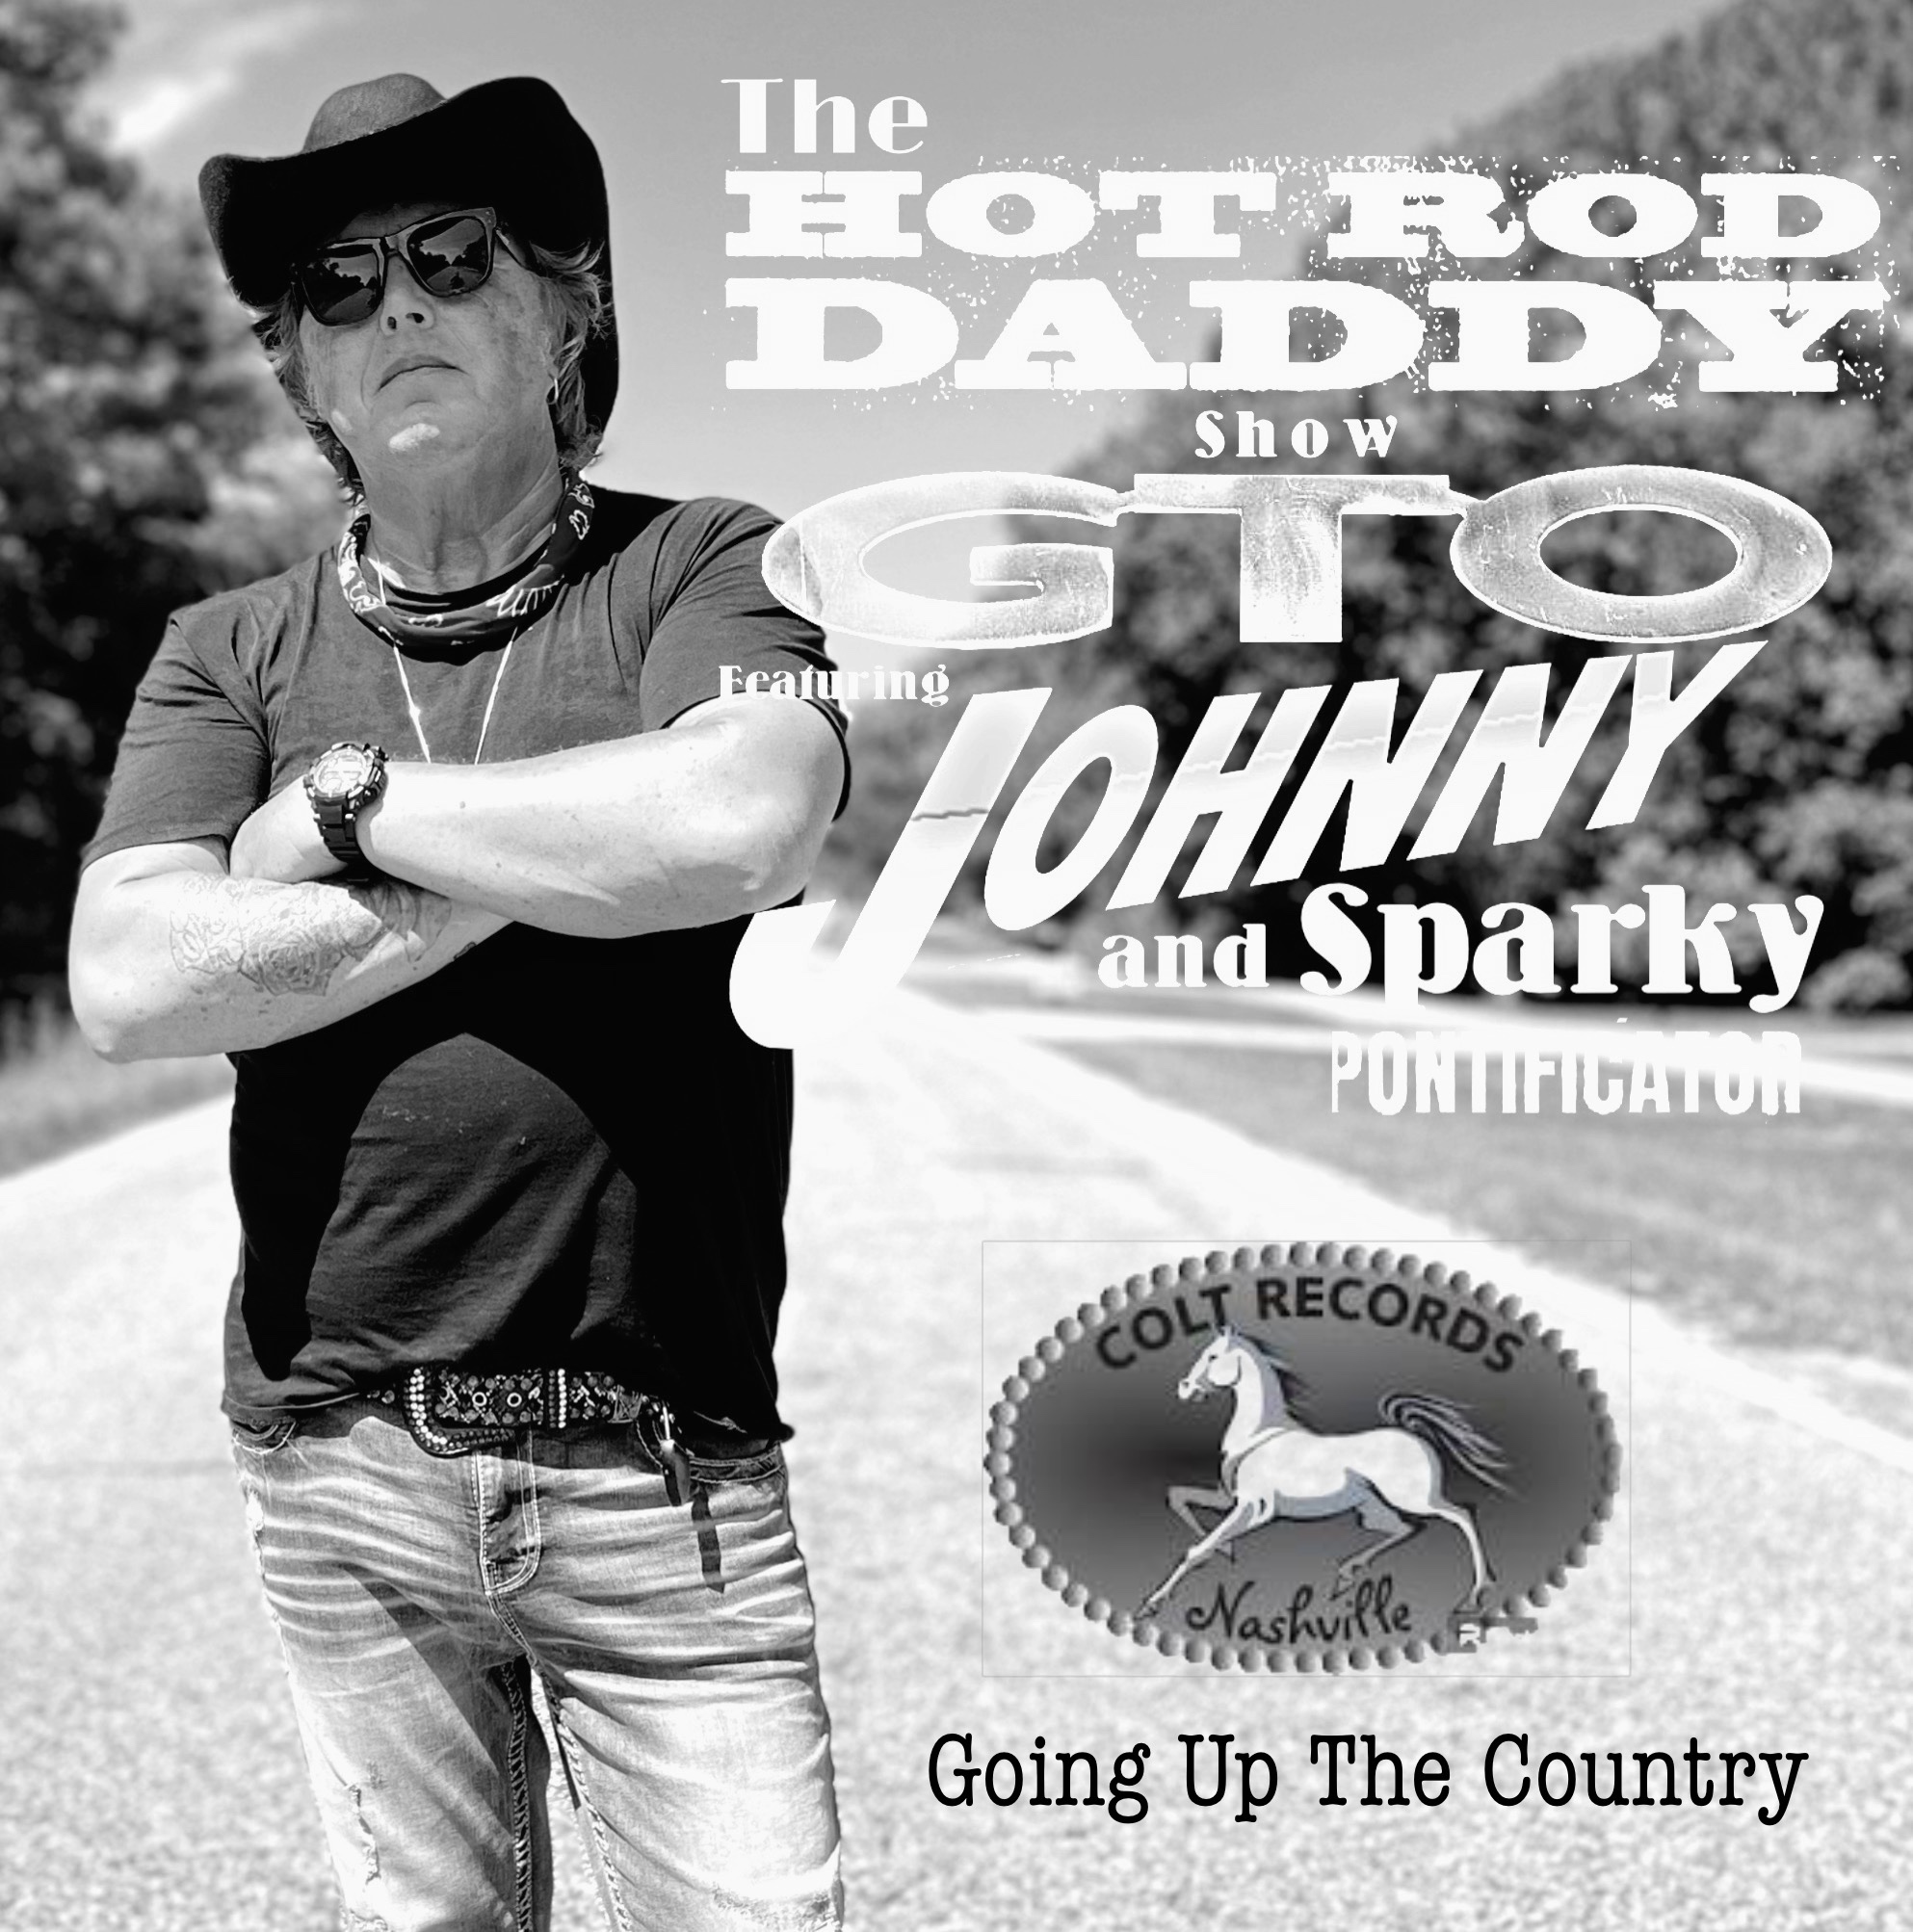 Lighting Up the Americana Scene with a Thrilling New Single - Rickie Joe Wilson Releases "The Hot Rod Daddy Show"